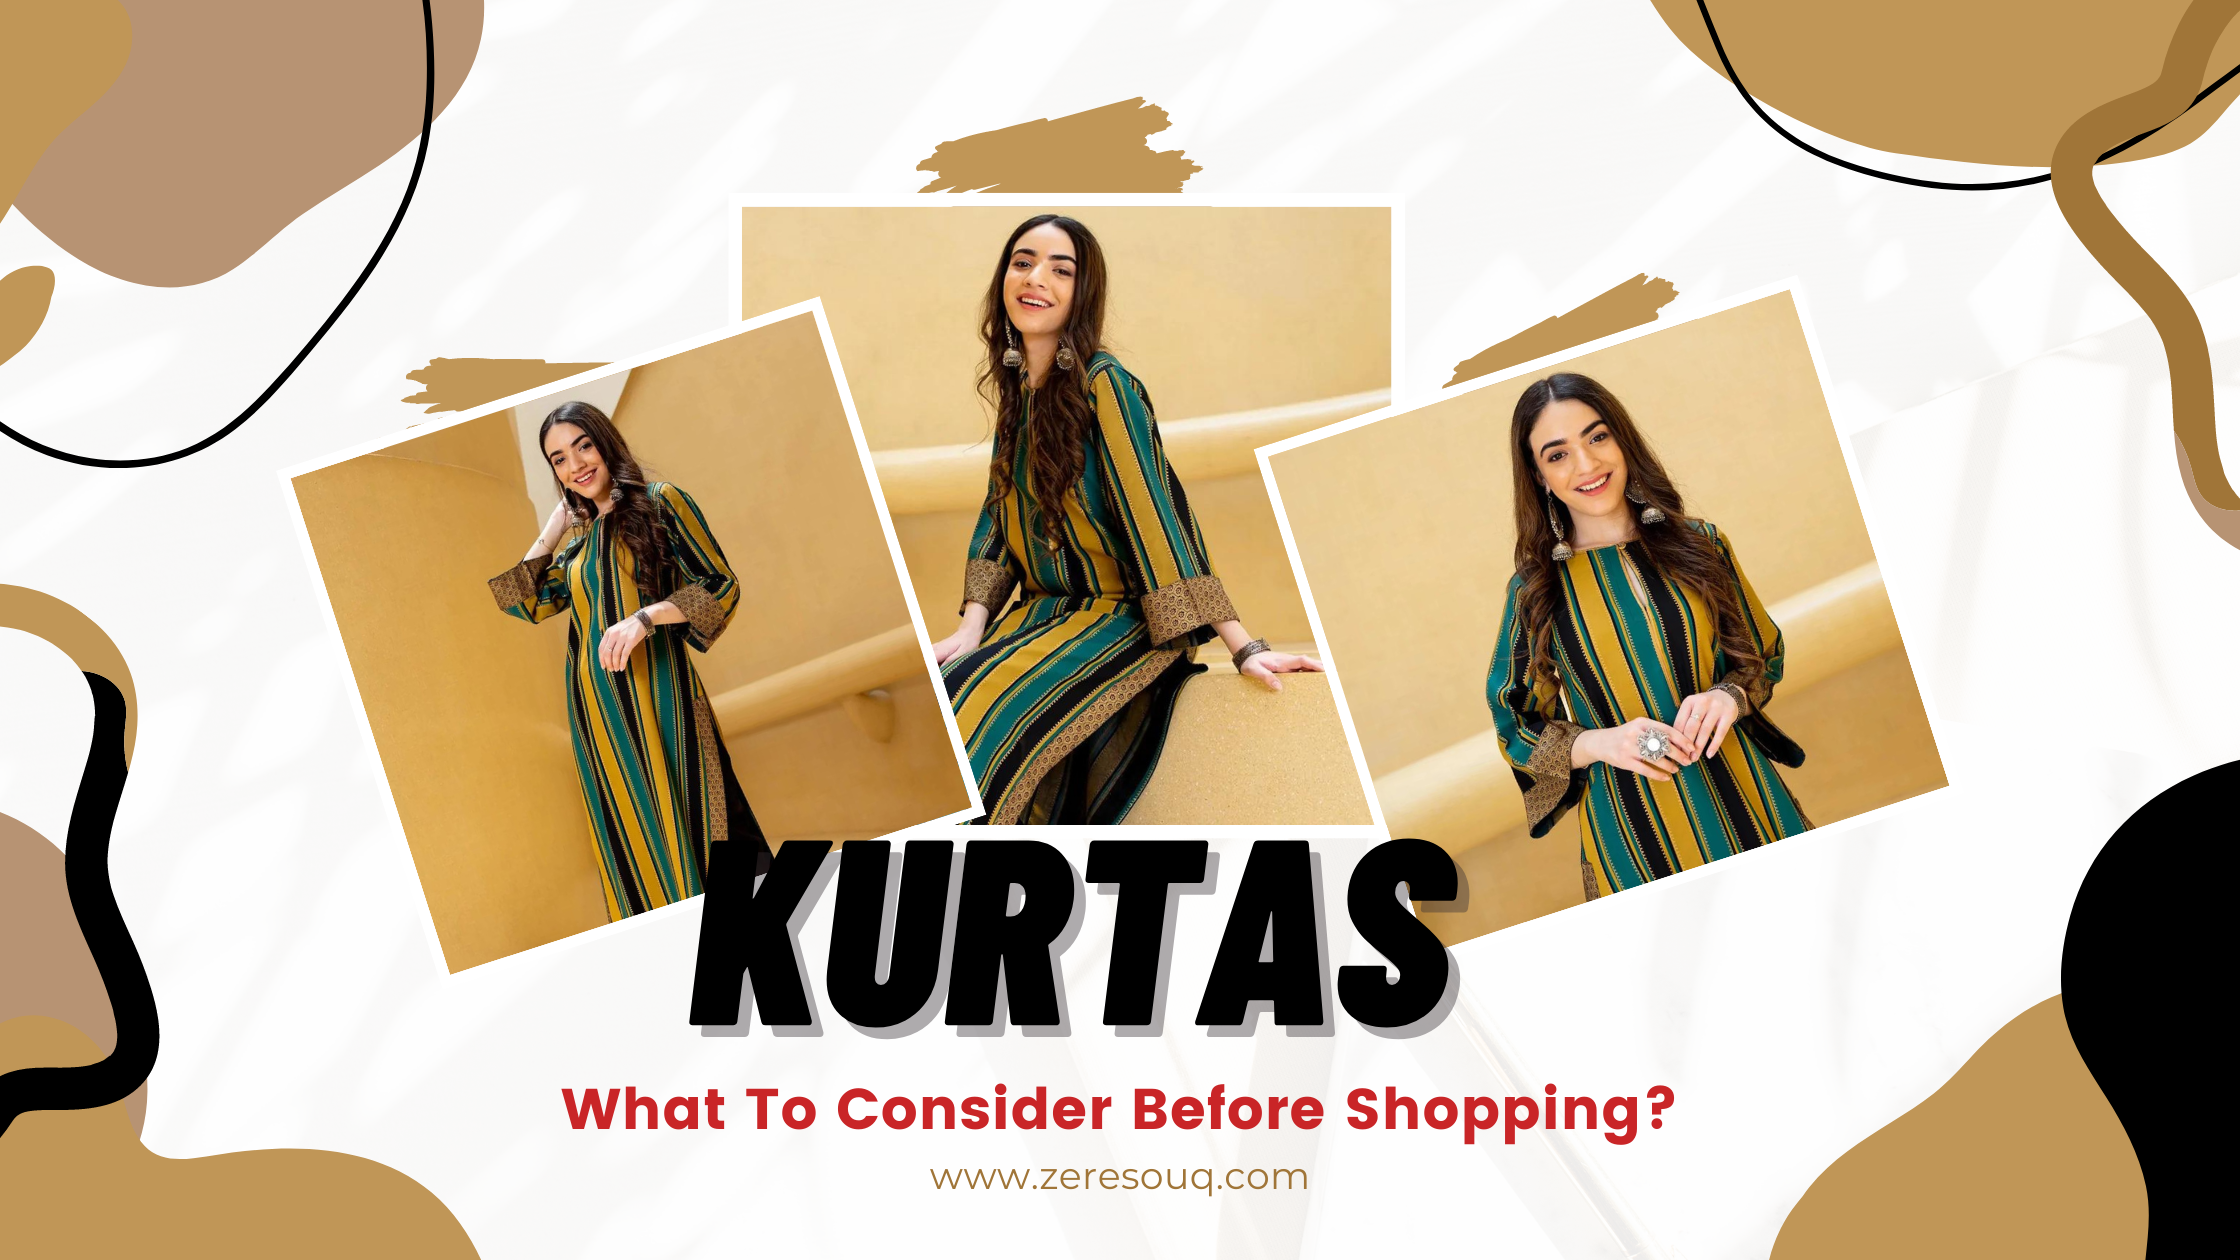 What Should I Look For Before Buying A Kurta Online?